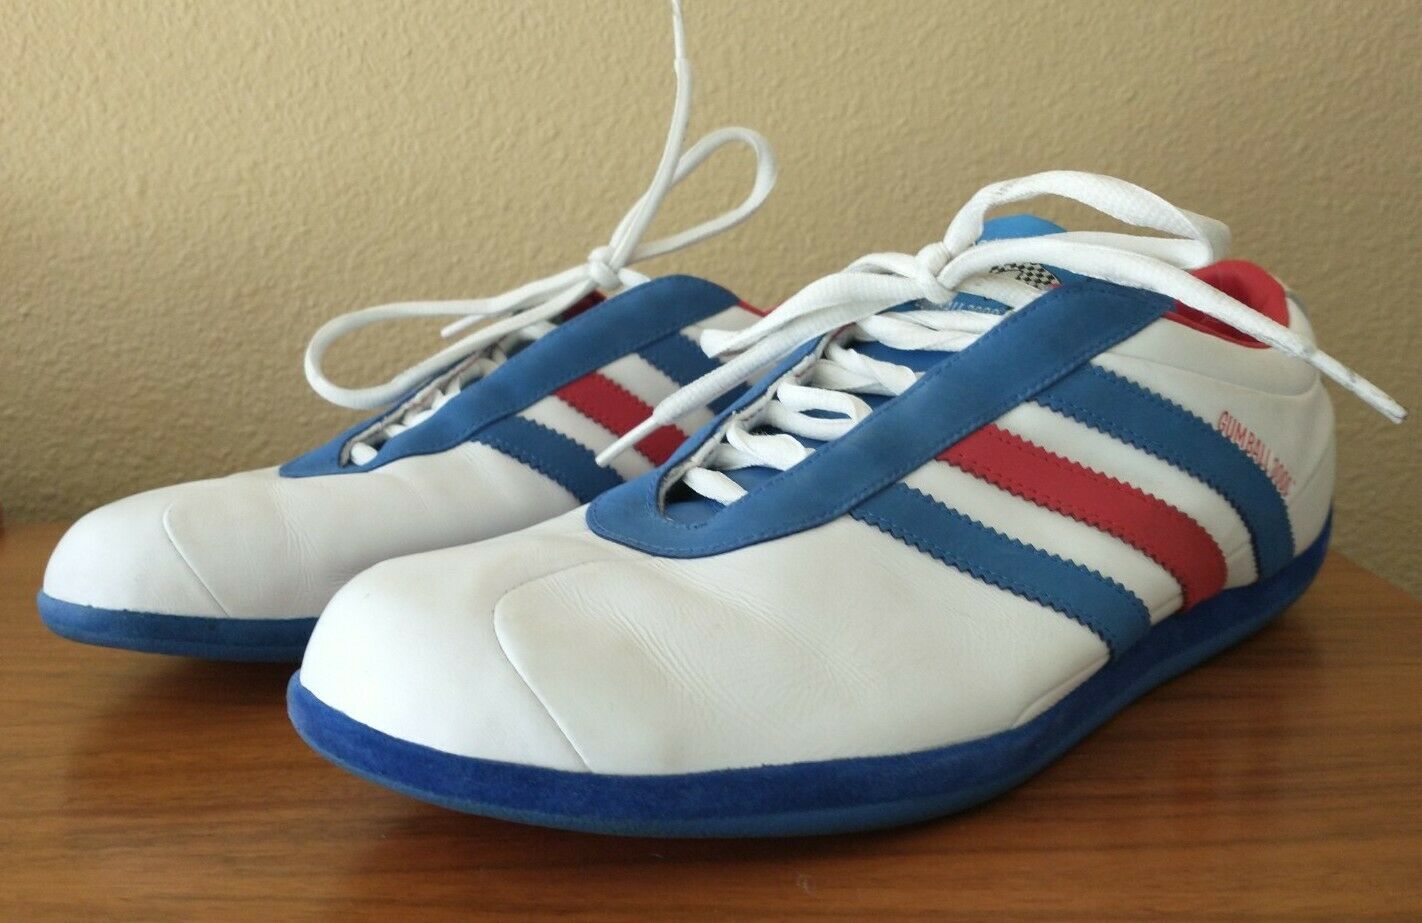 Vintage Adidas Gumball 3000 Shoes Sneakers 10